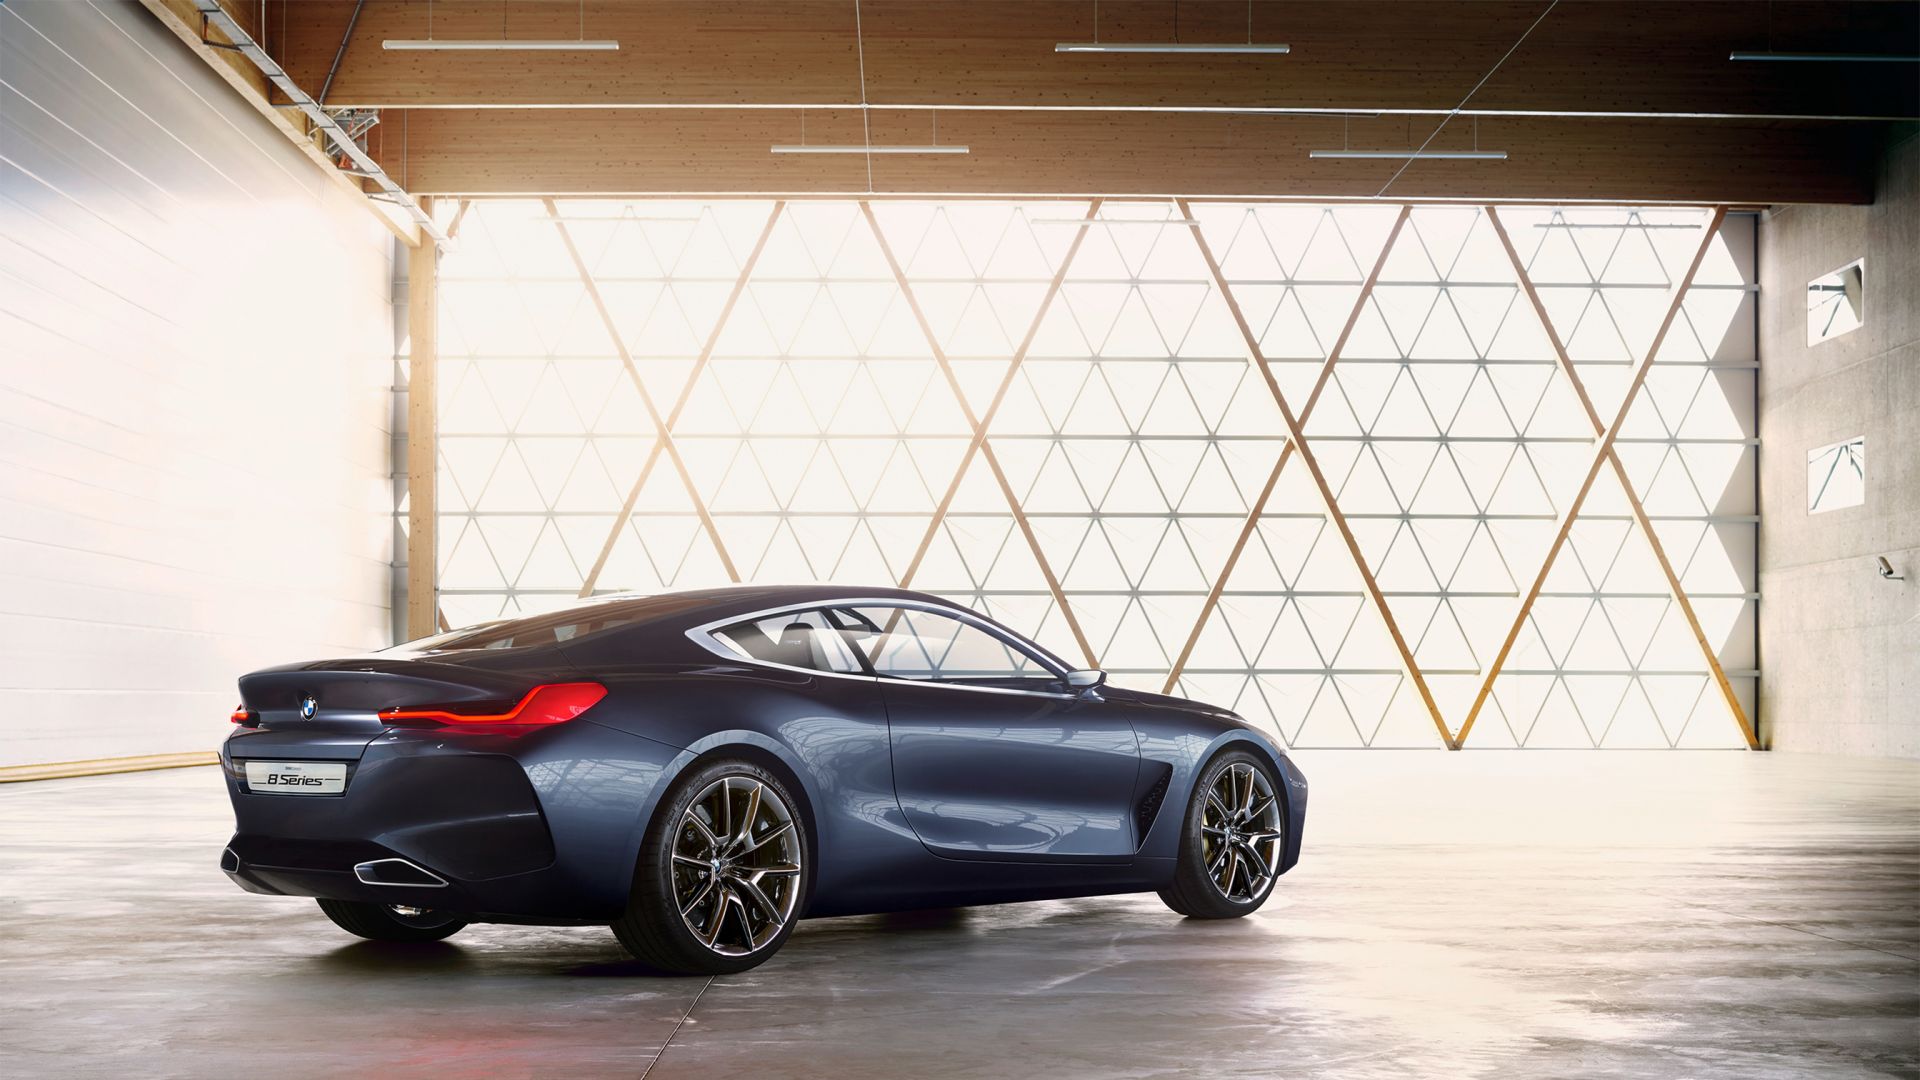 Desktop wallpaper luxurious car, showroom, bmw concept 8 series, HD image, picture, background, fb070a